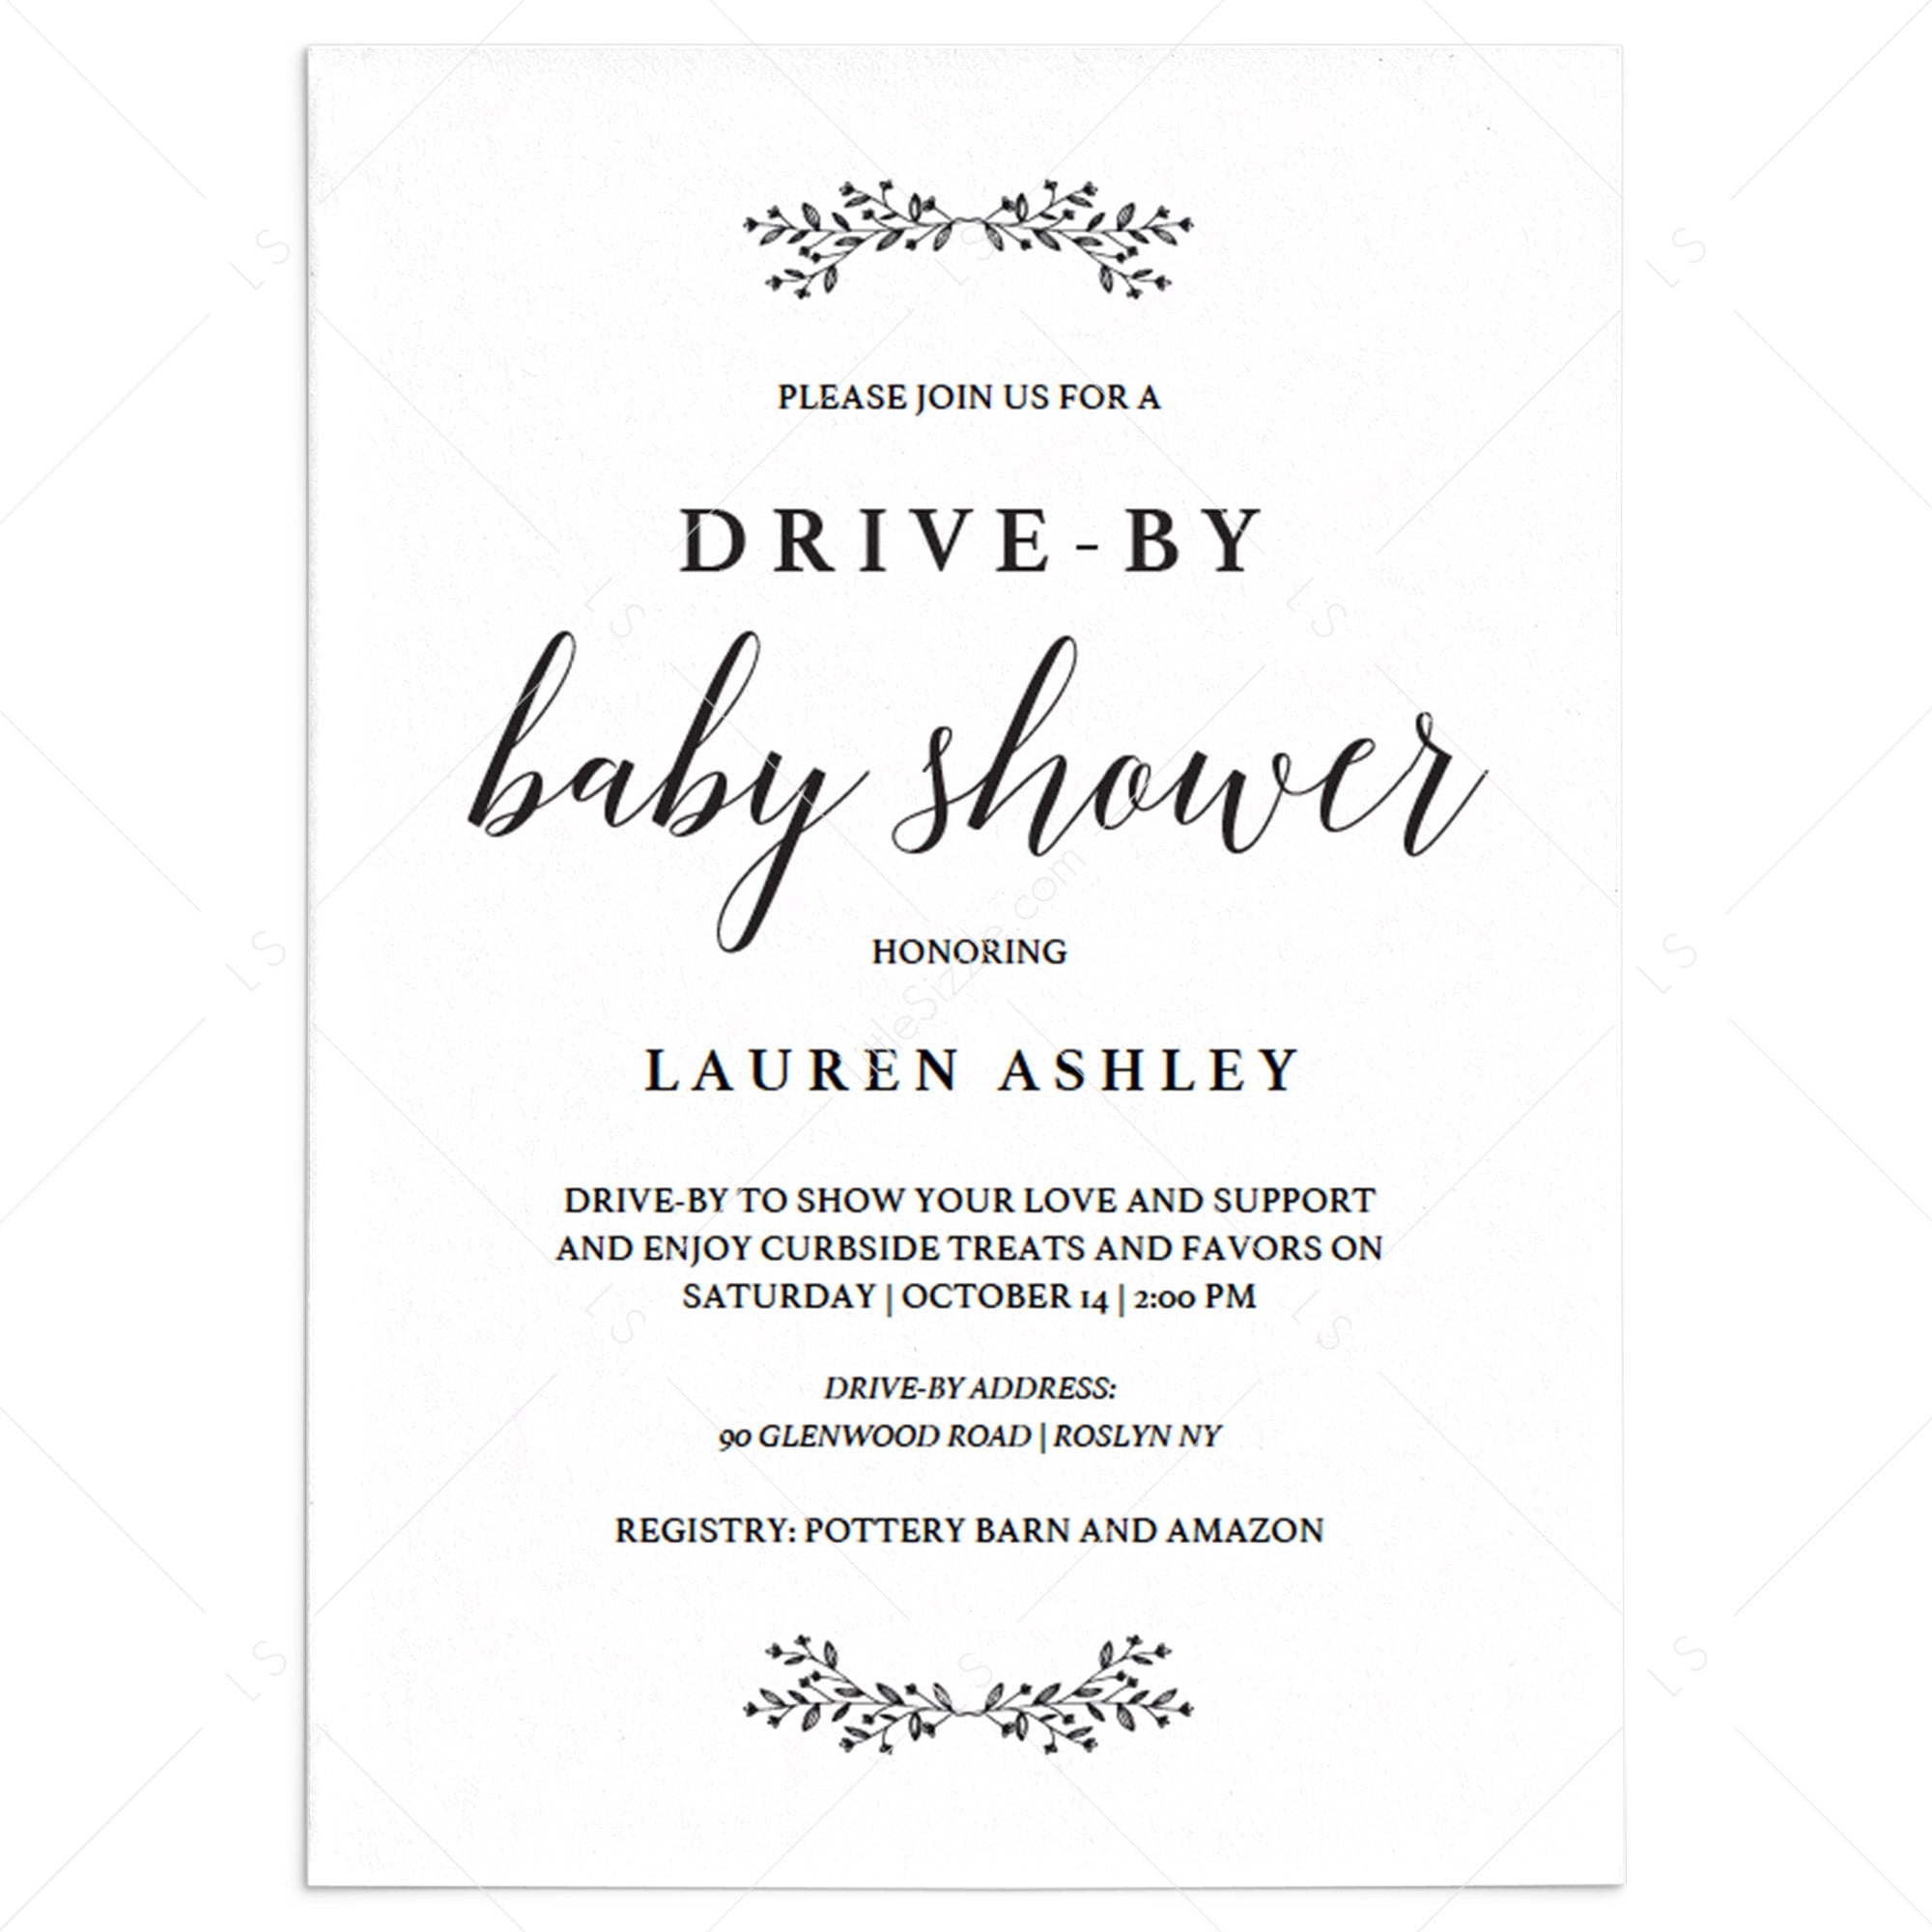 Drive-by baby shower invitation template by LittleSizzle